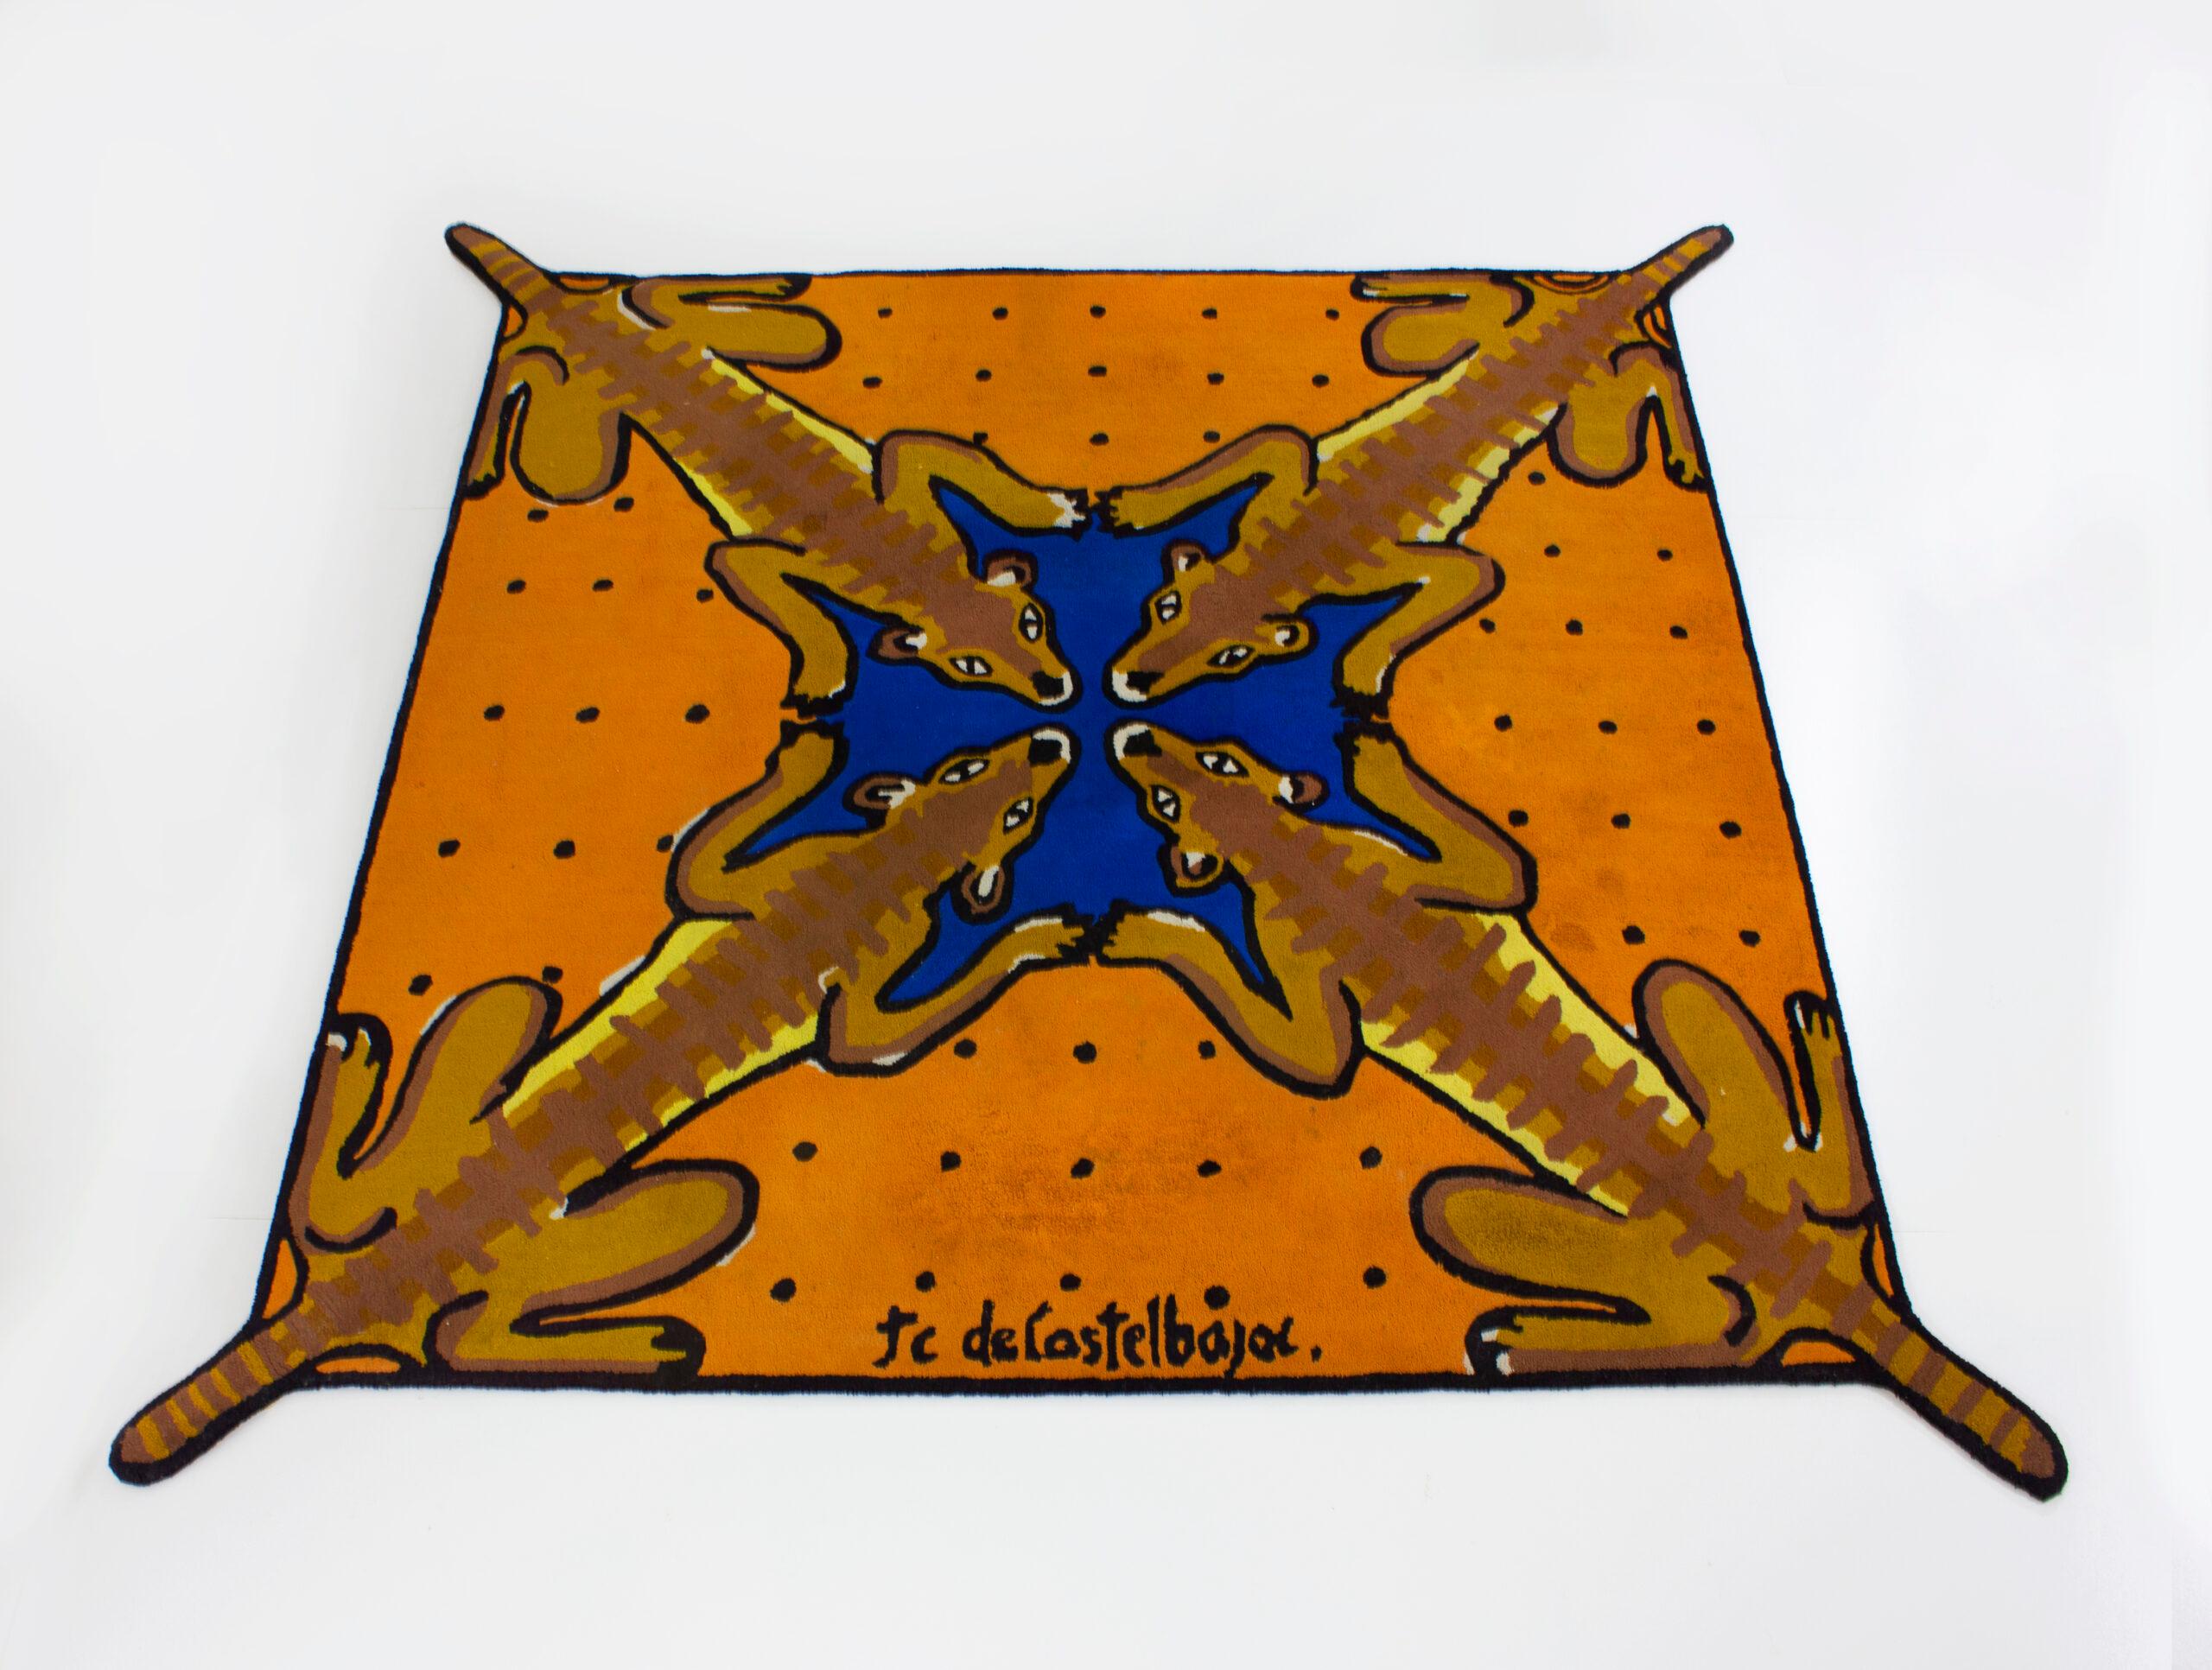 “Desert bar”, tufted wool carpet representing four stylised tigers drinking; Background in light orange color, highlights in yellow, black and blue, black borders. Signed in the frame of the carpet. In very good condition.